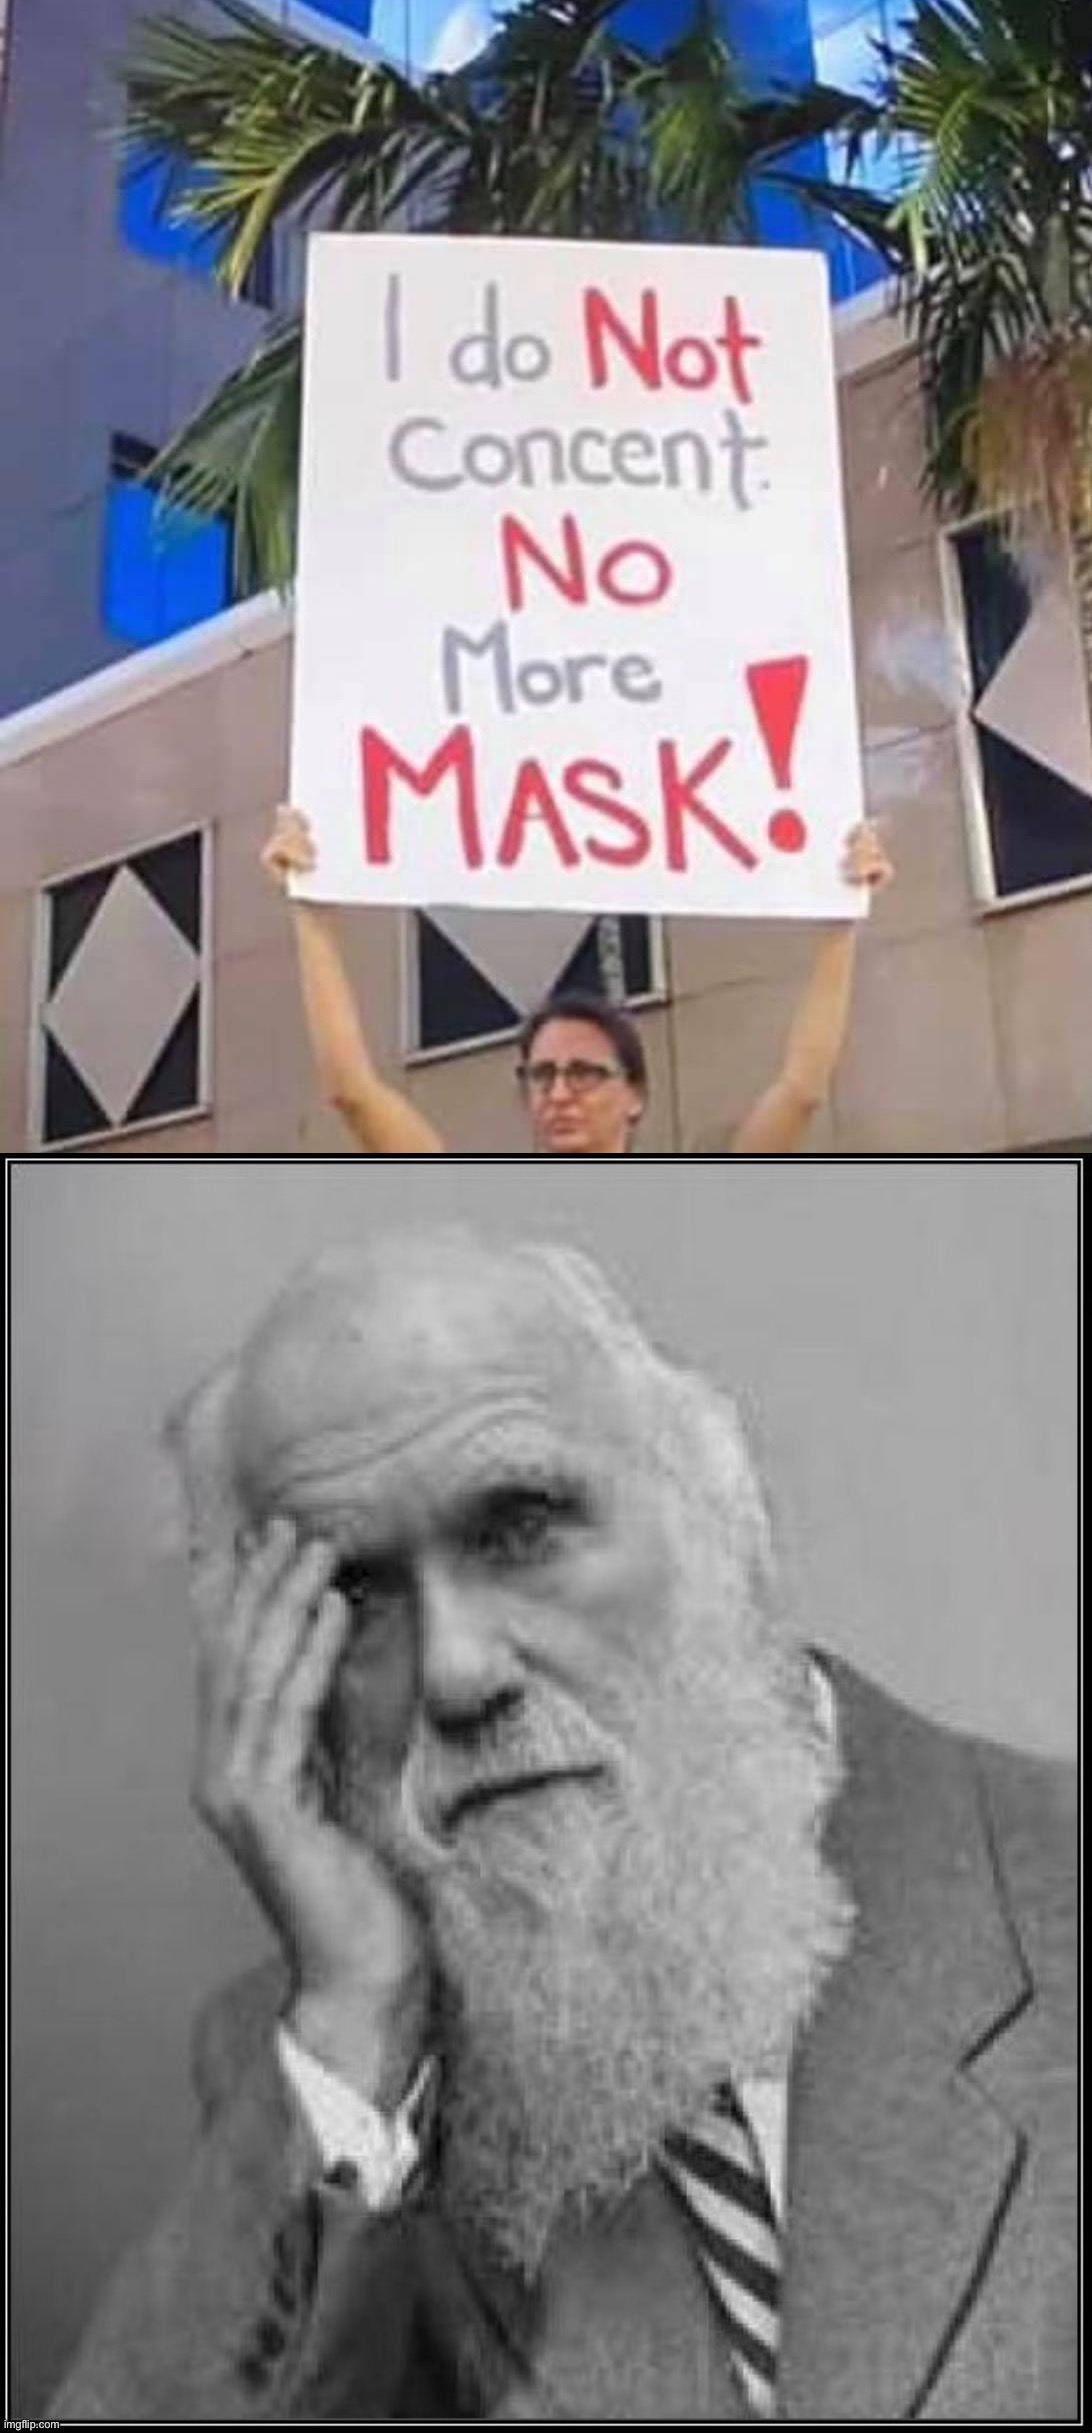 [Darwin facepalm] | image tagged in i do not concent no more mask,darwin facepalm | made w/ Imgflip meme maker